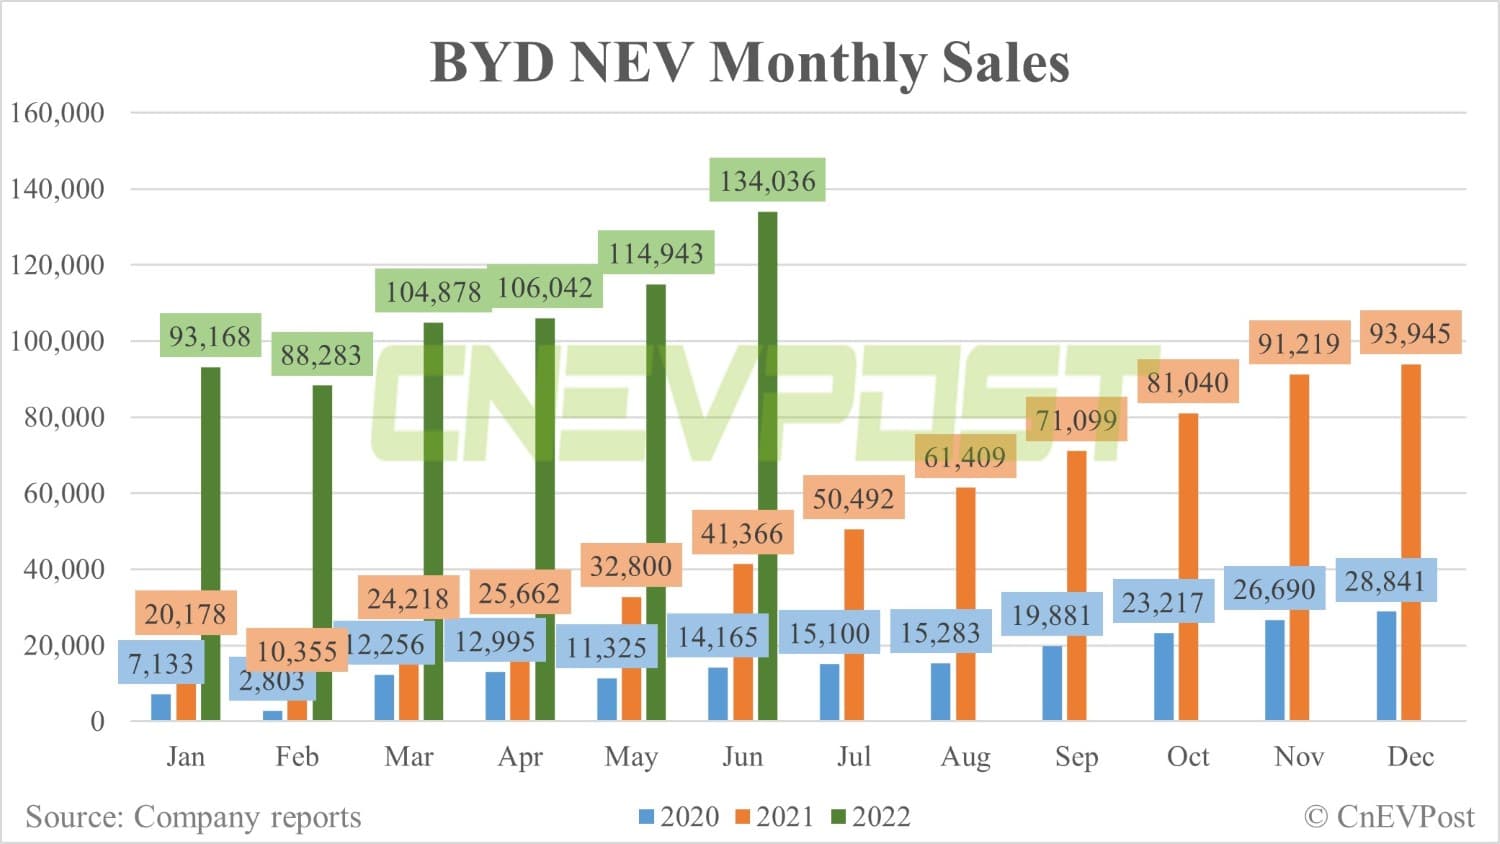 BYD posts record 134,036 NEV sales in June, exceeding 100,000 units for fourth consecutive month-CnEVPost